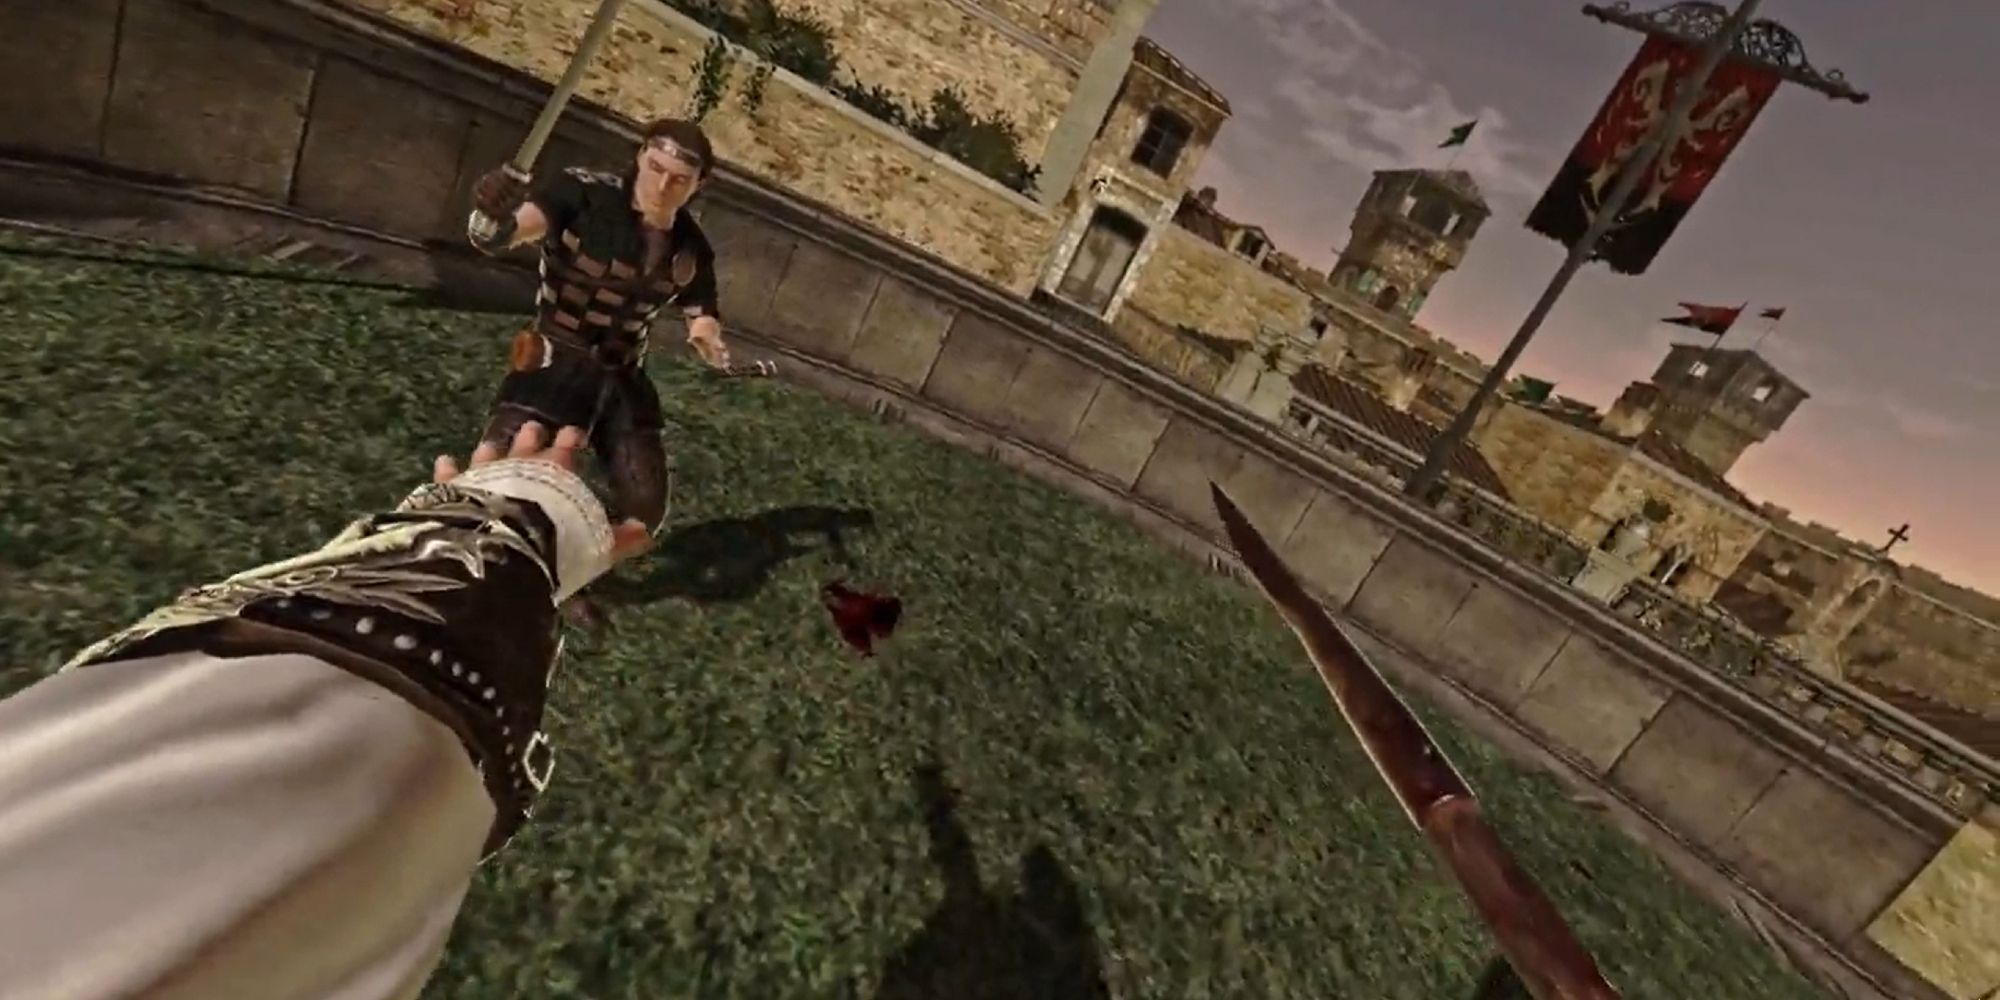 First person view of Ezio about to stab someone with a spear